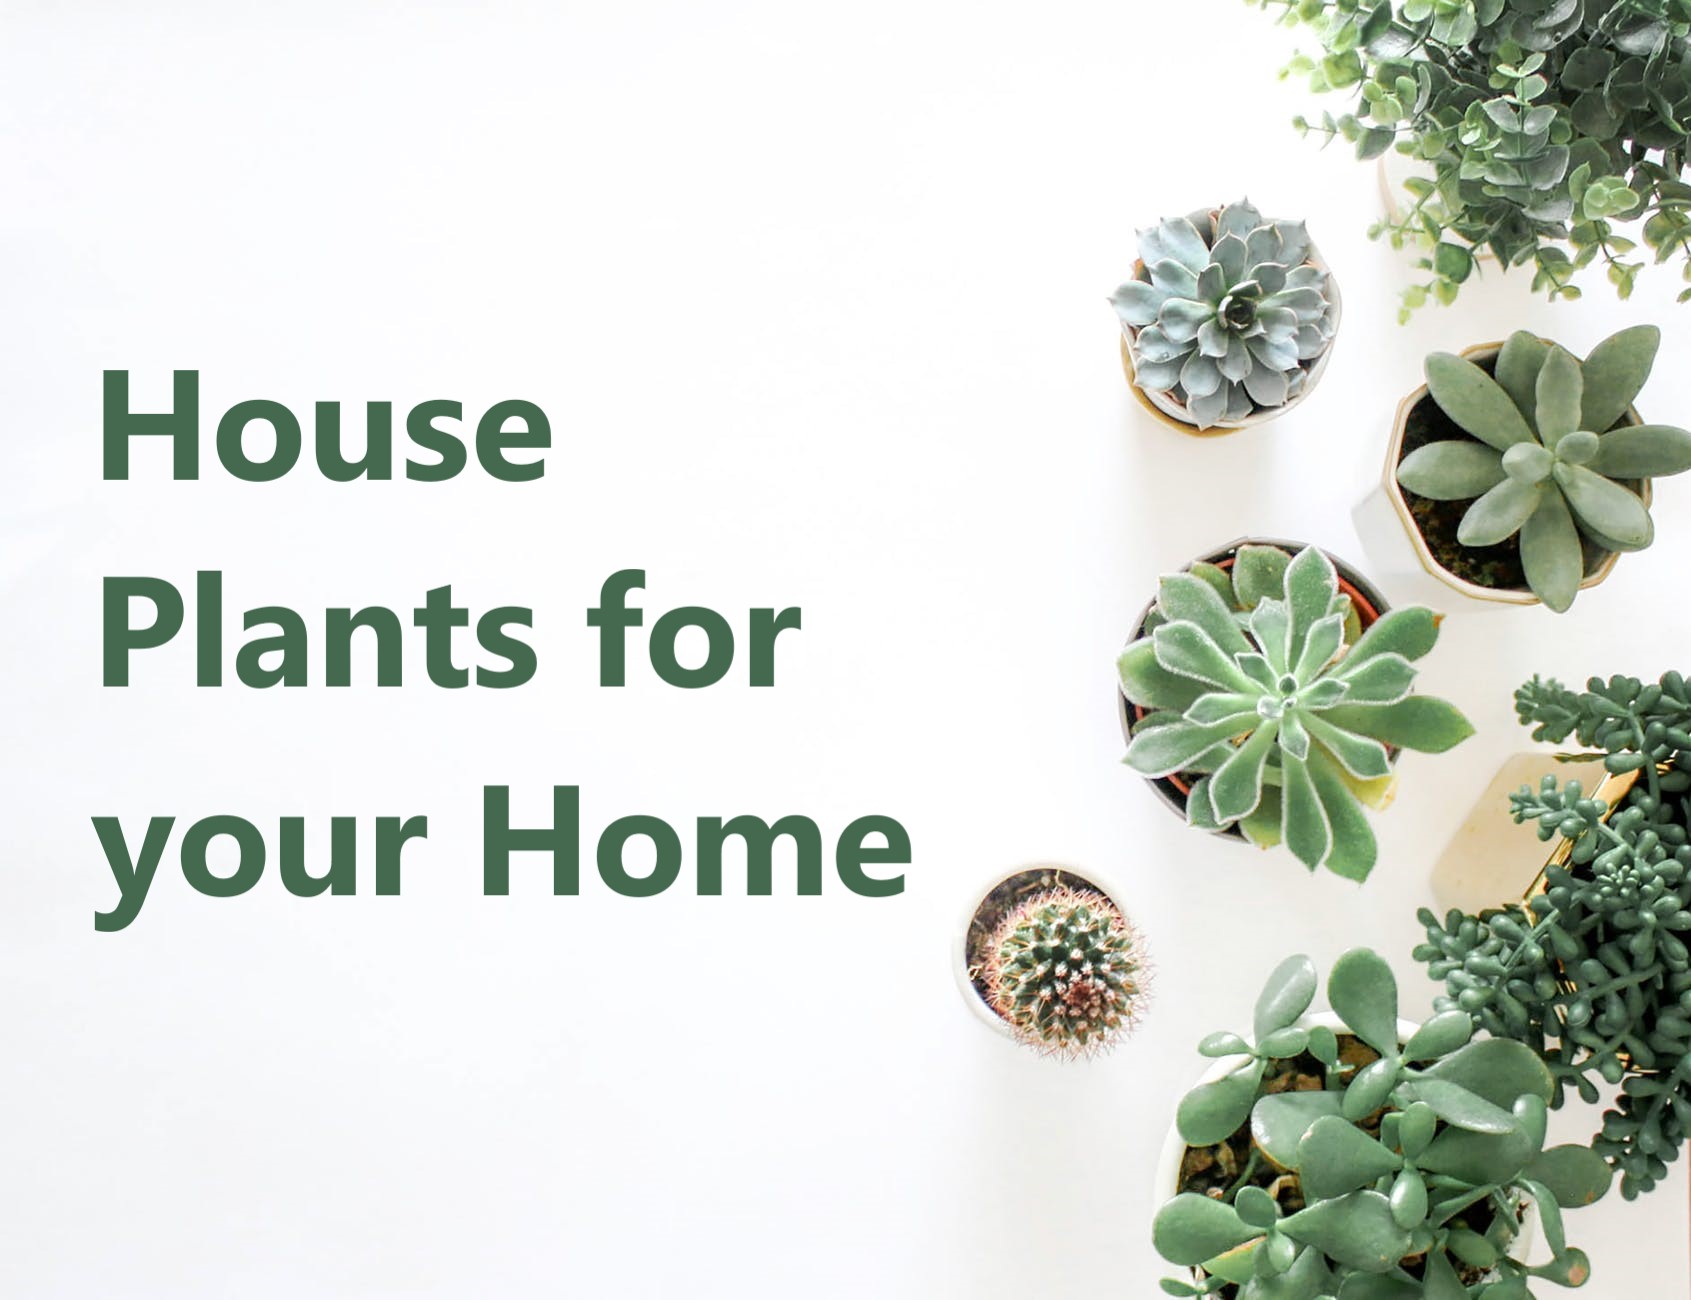 Houseplants for Your Home